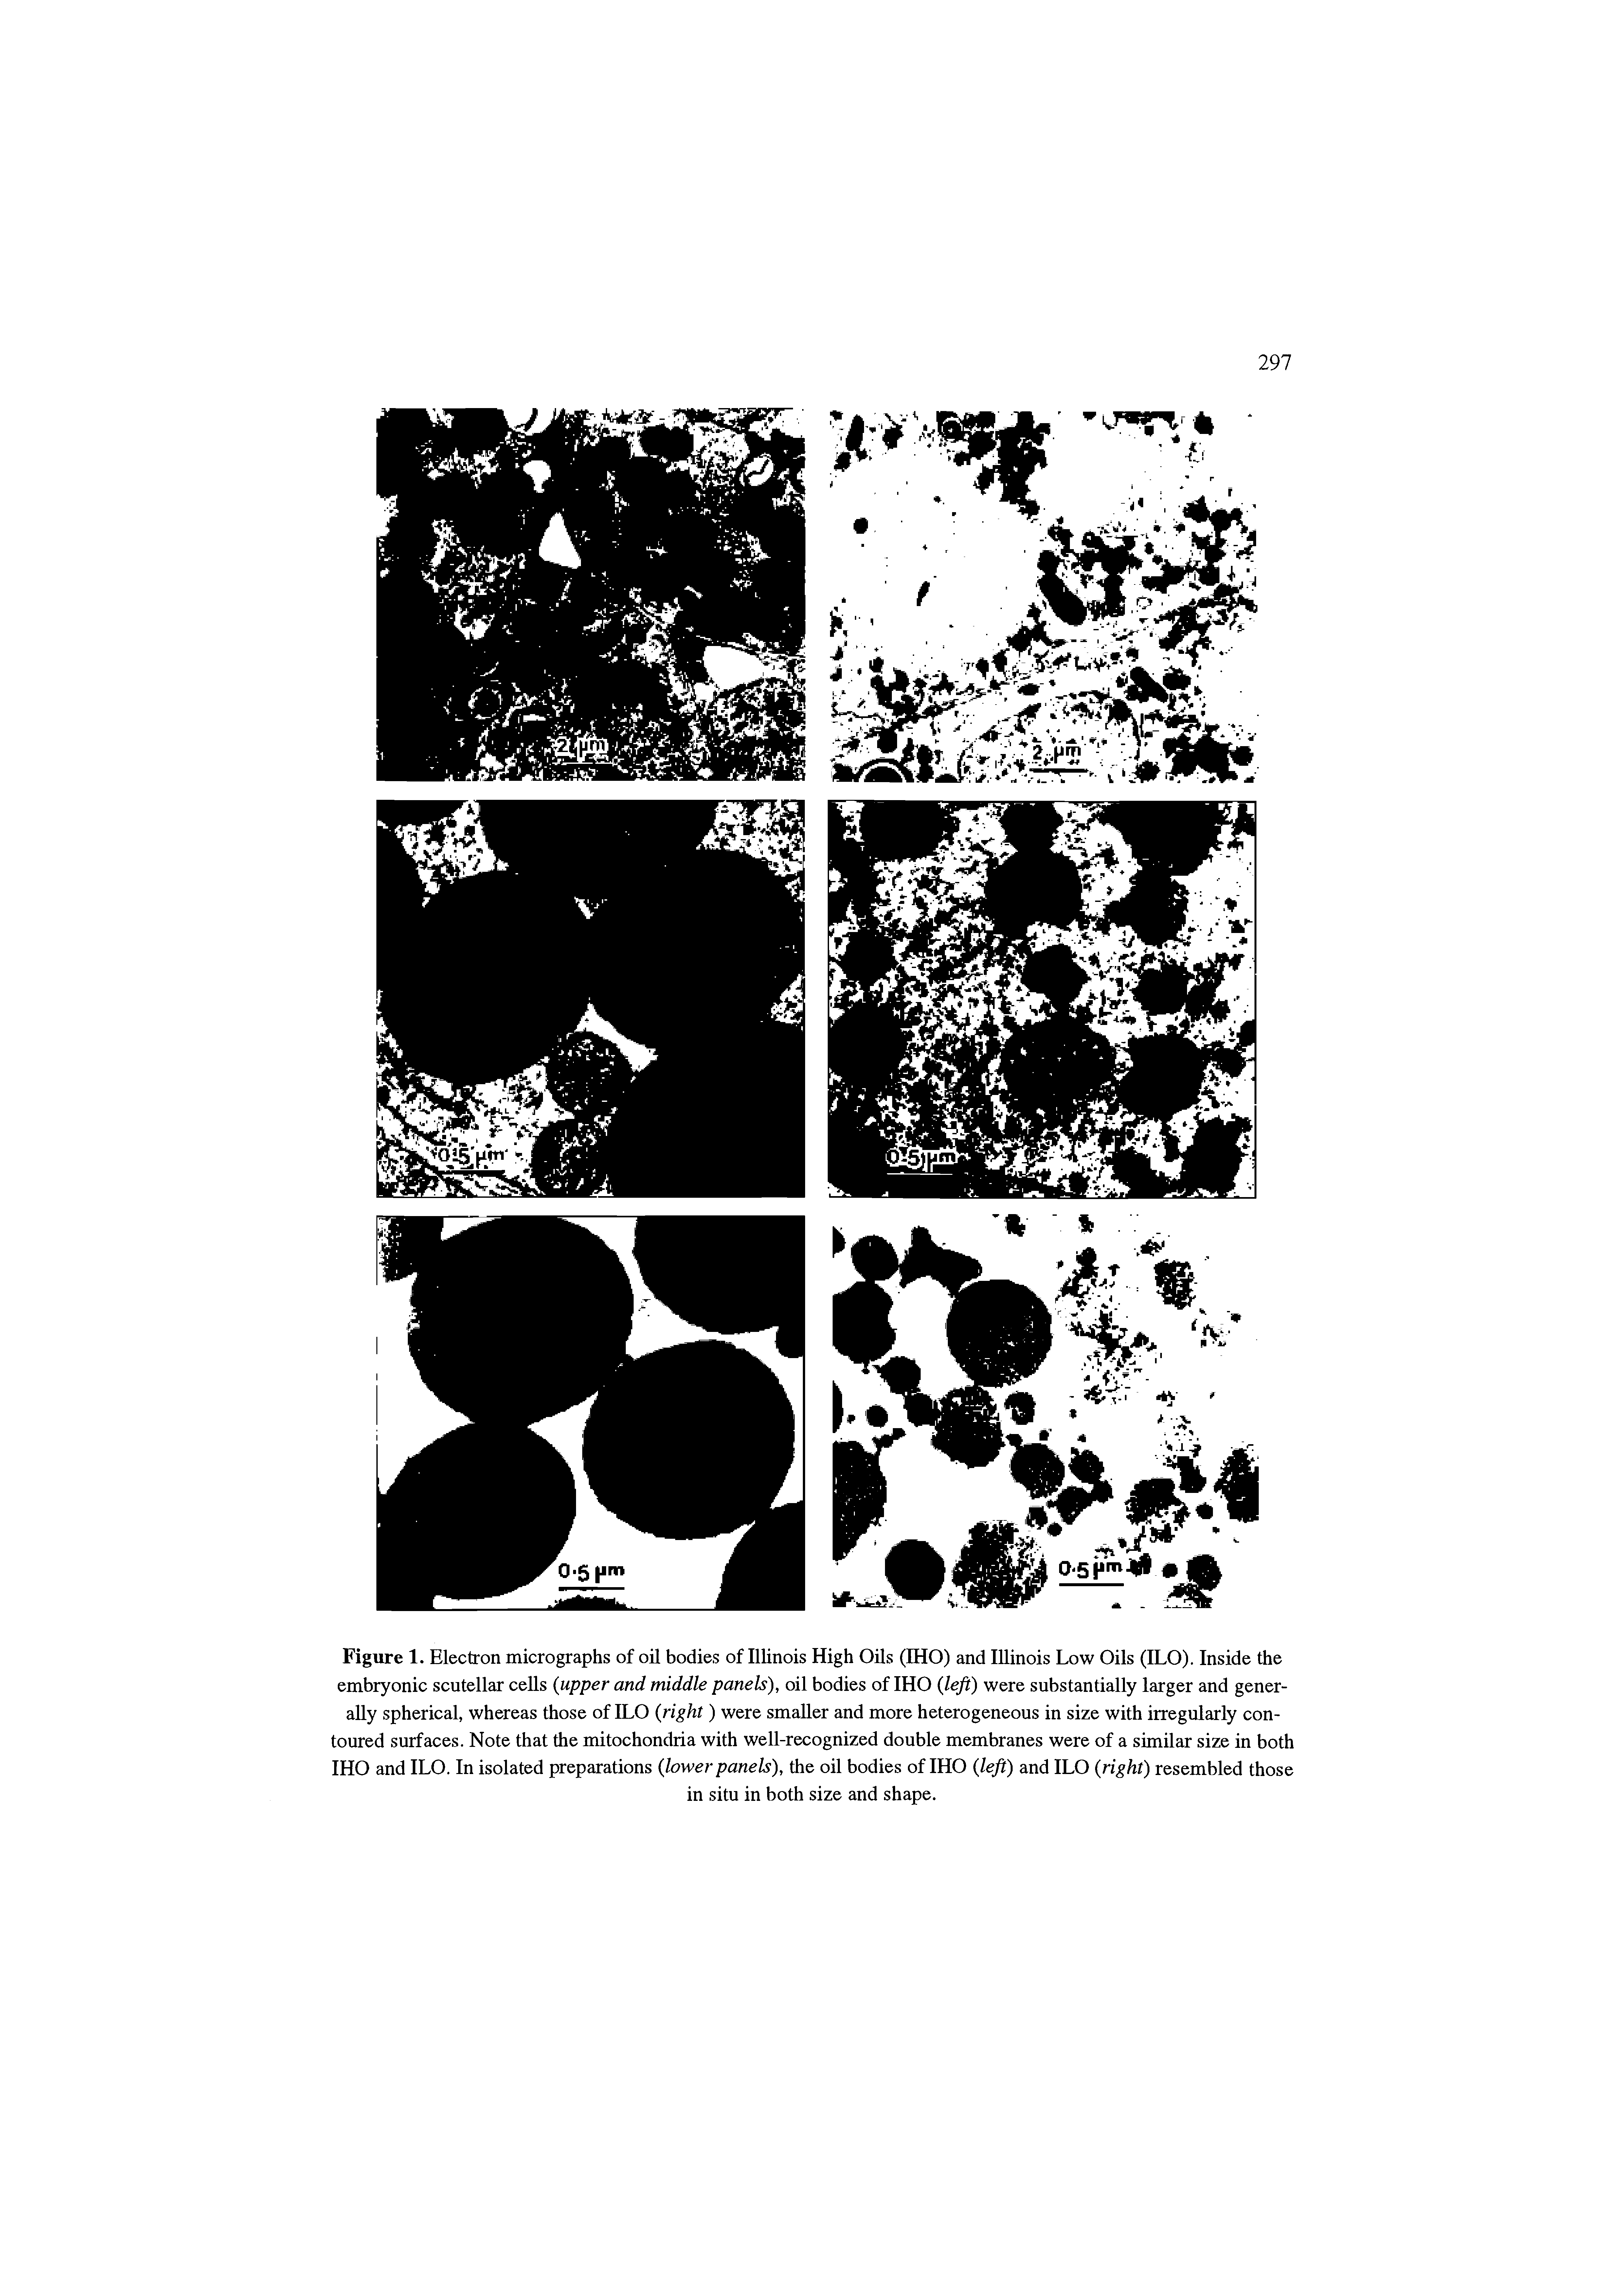 Figure 1. Electron micrographs of oil bodies of Illinois High Oils (IHO) and Illinois Low Oils (ILO). Inside the embryonic scutellar cells upper and middle panels), oil bodies of IHO lefi) were substantially larger and generally spherical, whereas those of ILO right) were smaller and more heterogeneous in size with irregularly contoured surfaces. Note that the mitochondria with well-recognized double membranes were of a similar size in both IHO and ILO. In isolated preparations lower panels), the oil bodies of IHO left) and ILO right) resembled those...